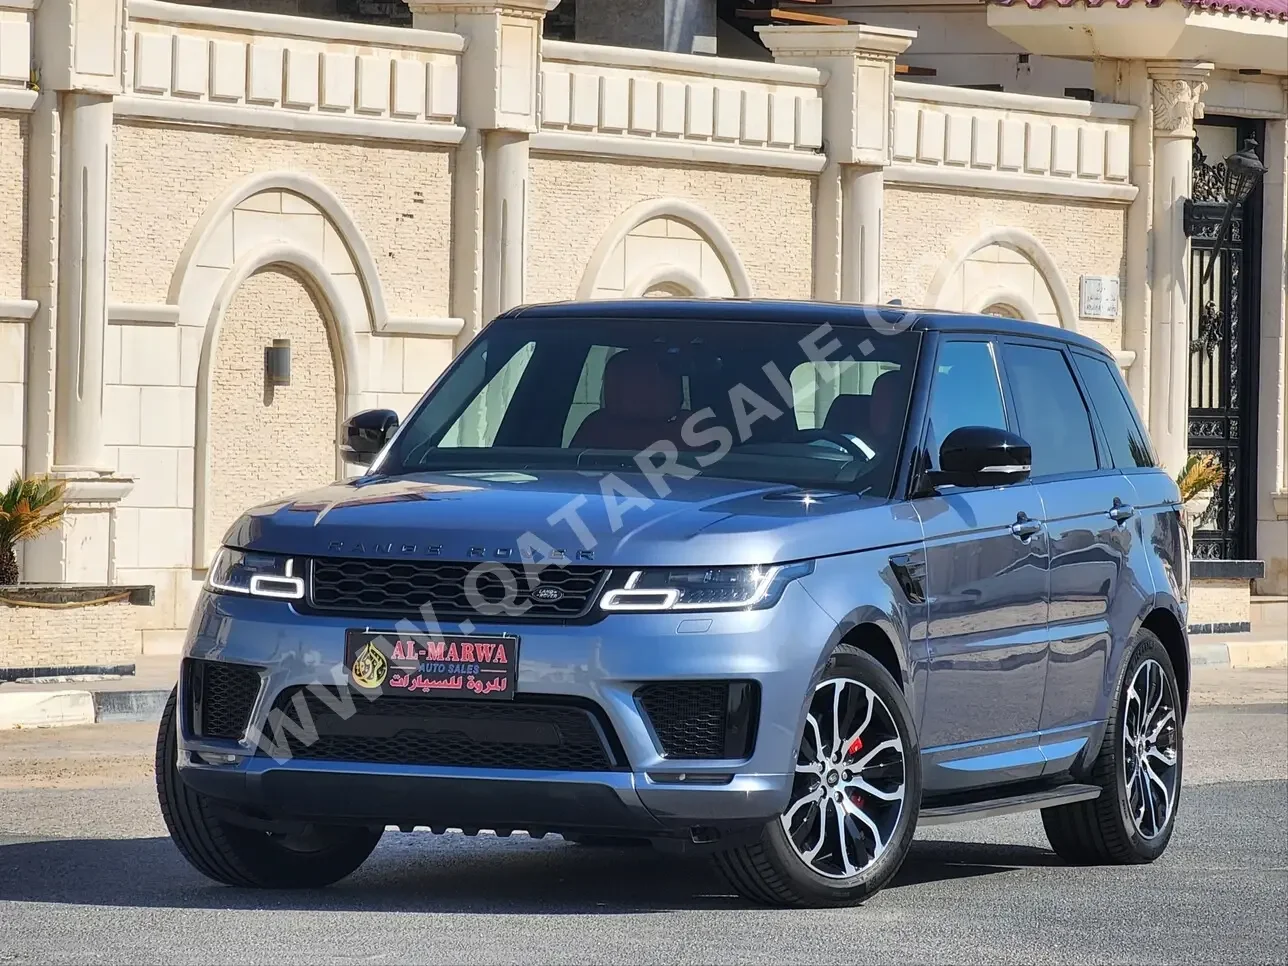 Land Rover  Range Rover  Sport Super charged  2020  Automatic  37,000 Km  8 Cylinder  Four Wheel Drive (4WD)  SUV  Blue  With Warranty